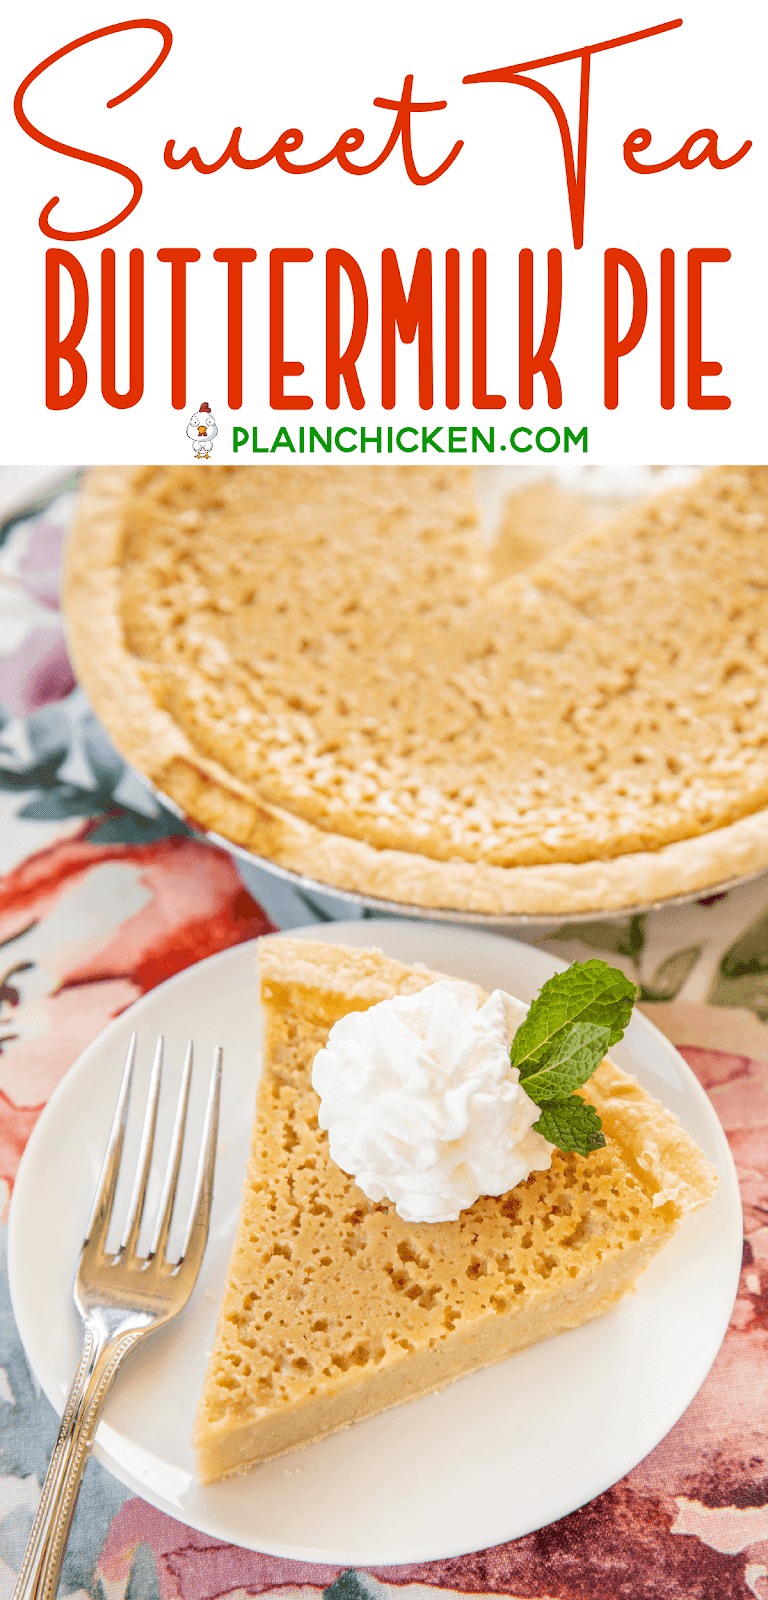 slice of pie topped with whipped cream and mint